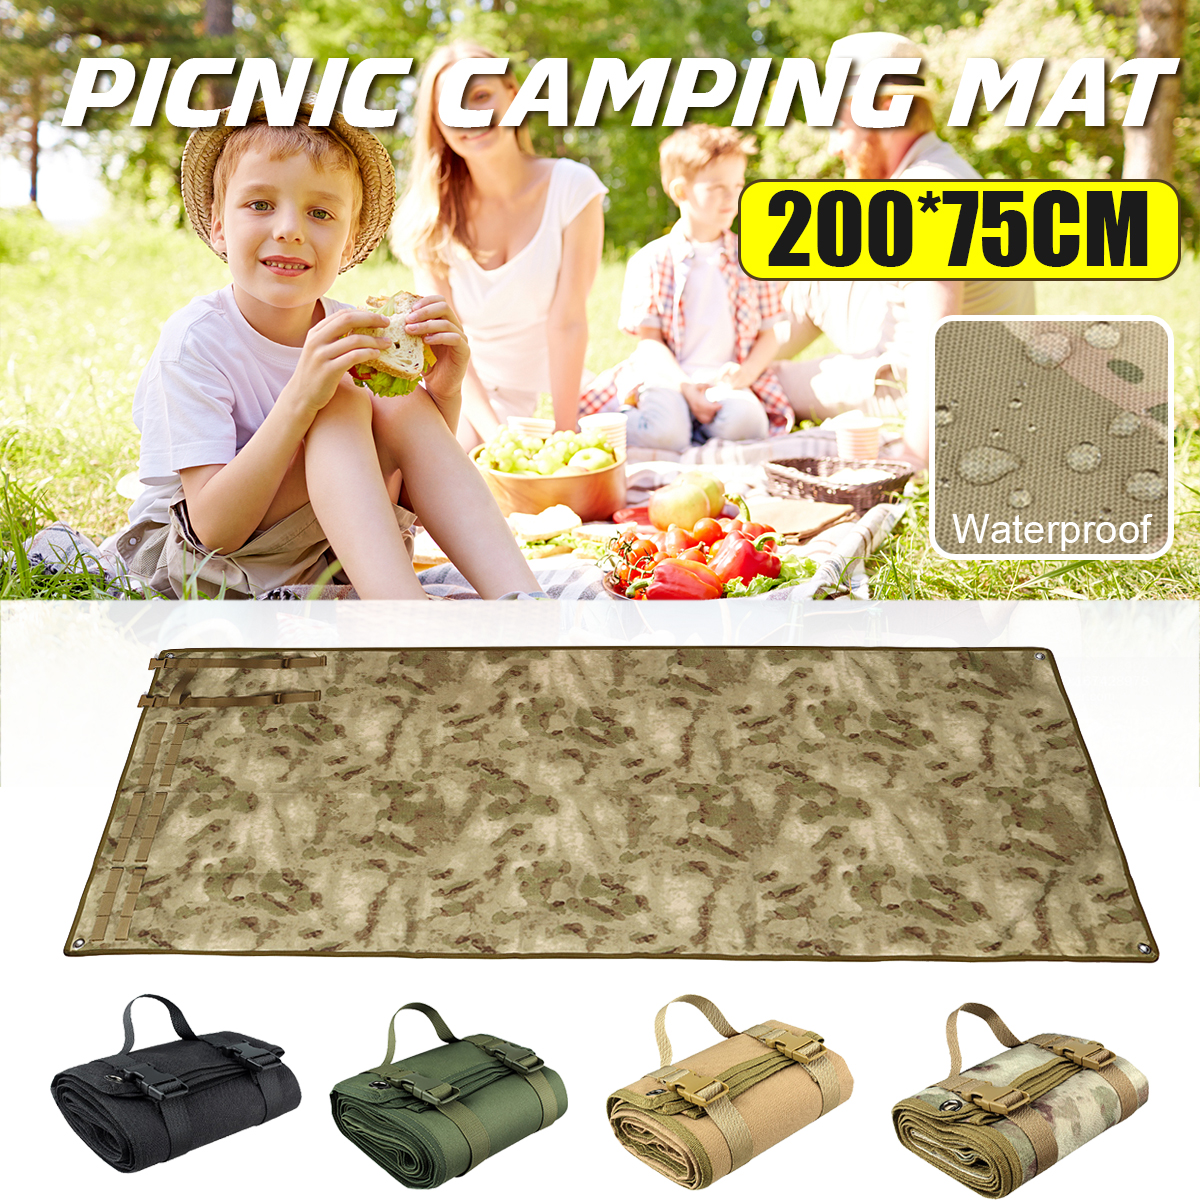 Picnic-Camping-Mat-Foldable-Roll-Up-Mat-Foldable-Portable-Non-Slip-Durable-Rest-Outdoor-Camping-Picn-1882342-1